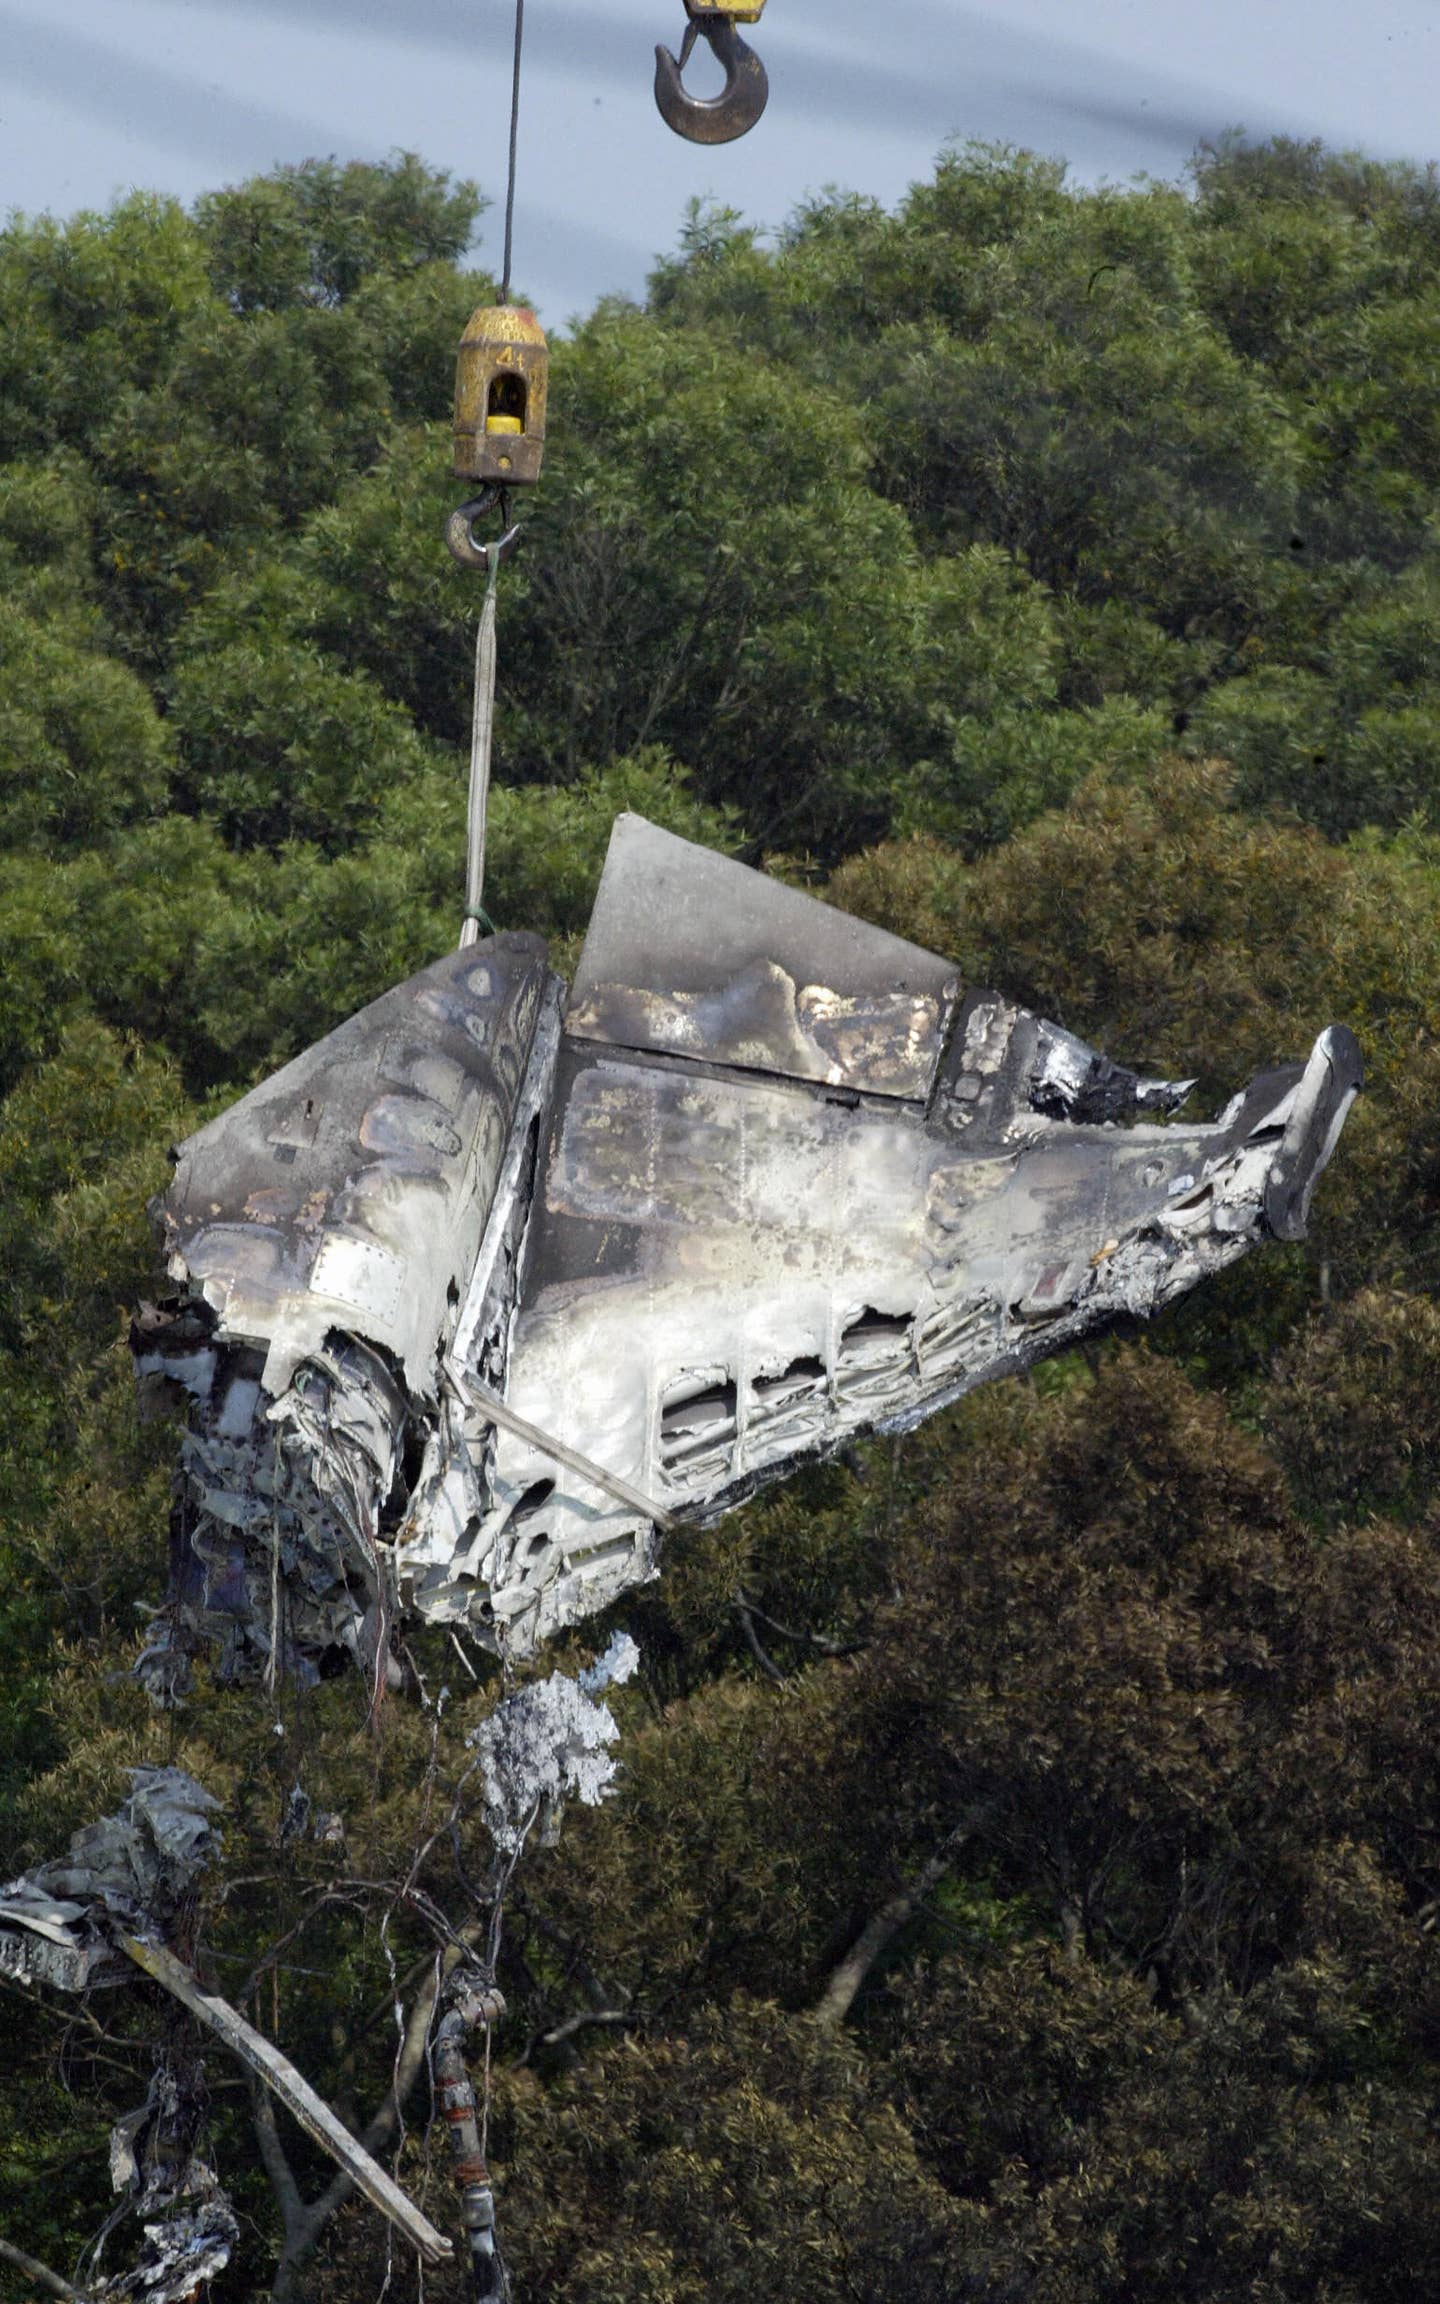 The wreckage of a crashed F-5F is lifted by a crane in Hsinchu, northern Taiwan, on May 11, 2007. Two Taiwanese fighter pilots and two Singaporean servicemen were killed when an F-5F jet crashed into a military compound during an exercise. <em>STR/AFP via Getty Images</em>